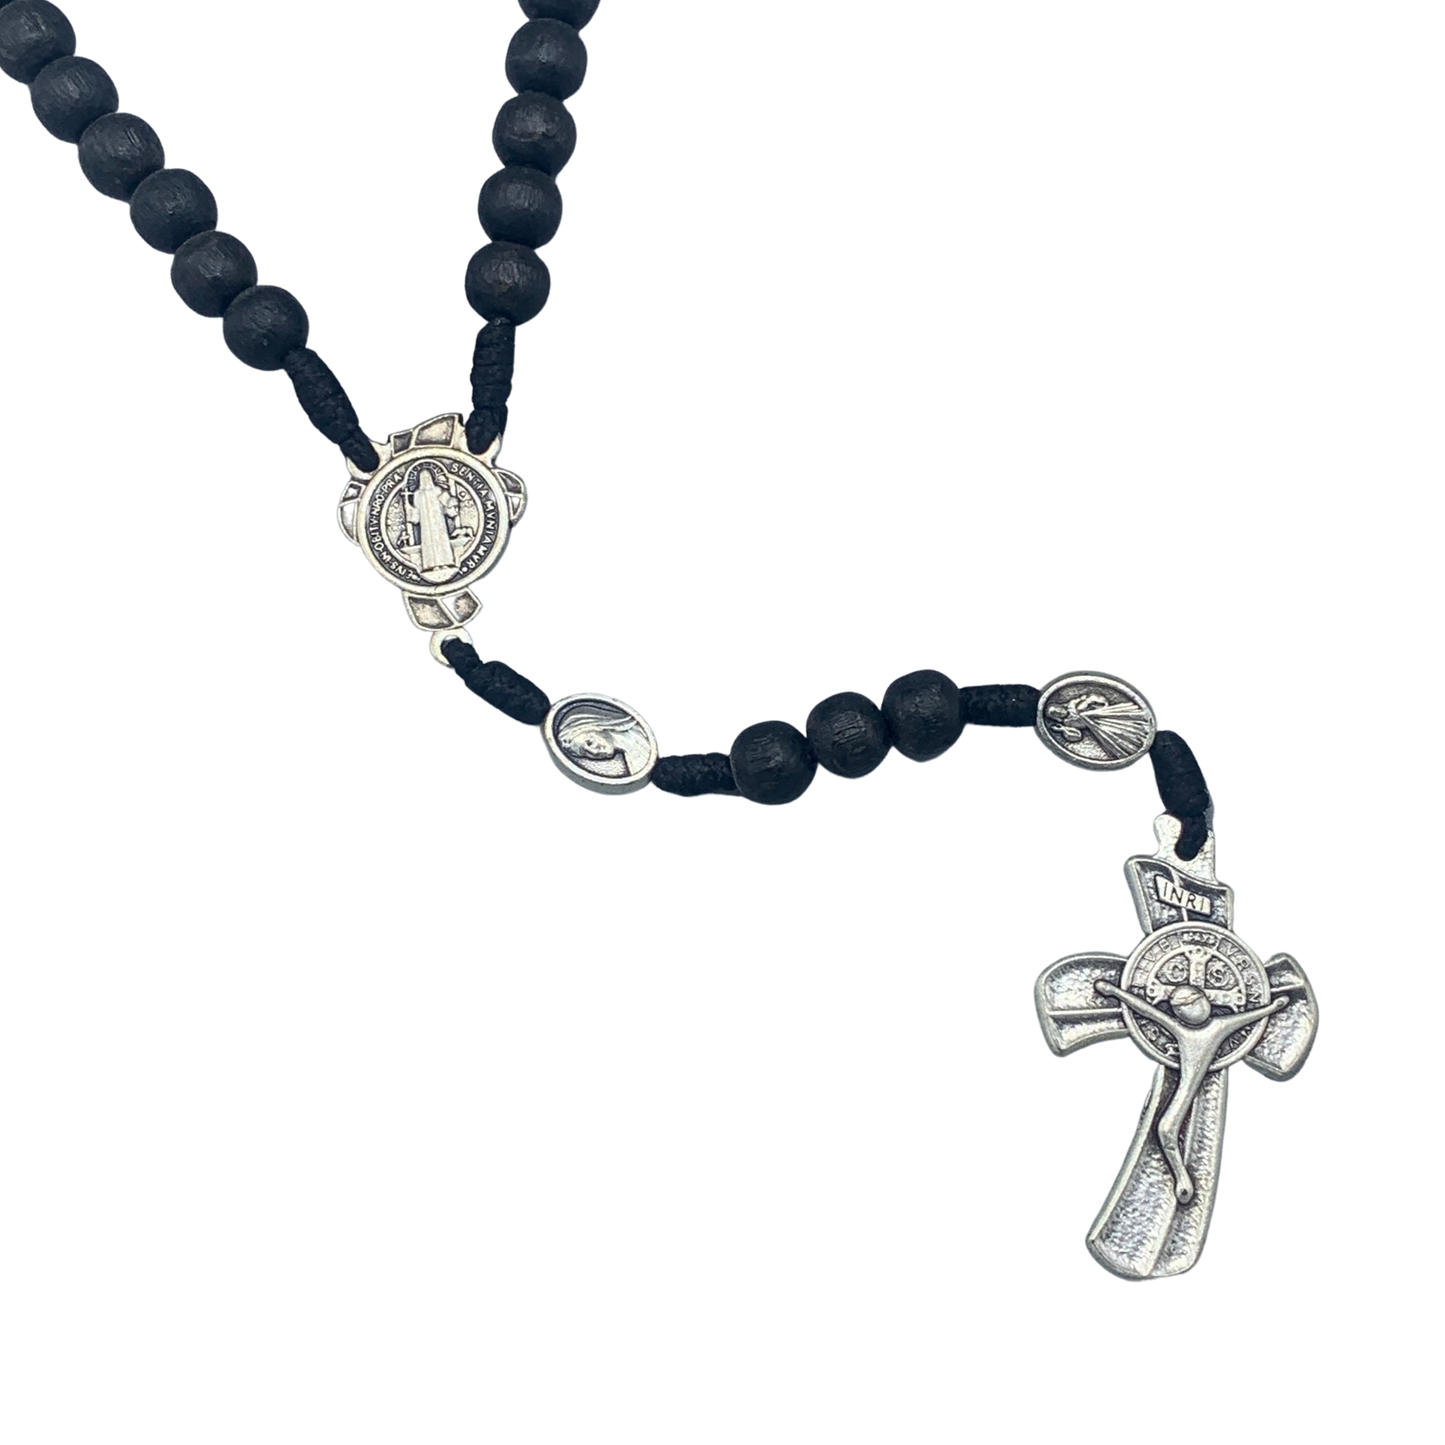 Black Wood Rosary with Oval St. Benedict Medals